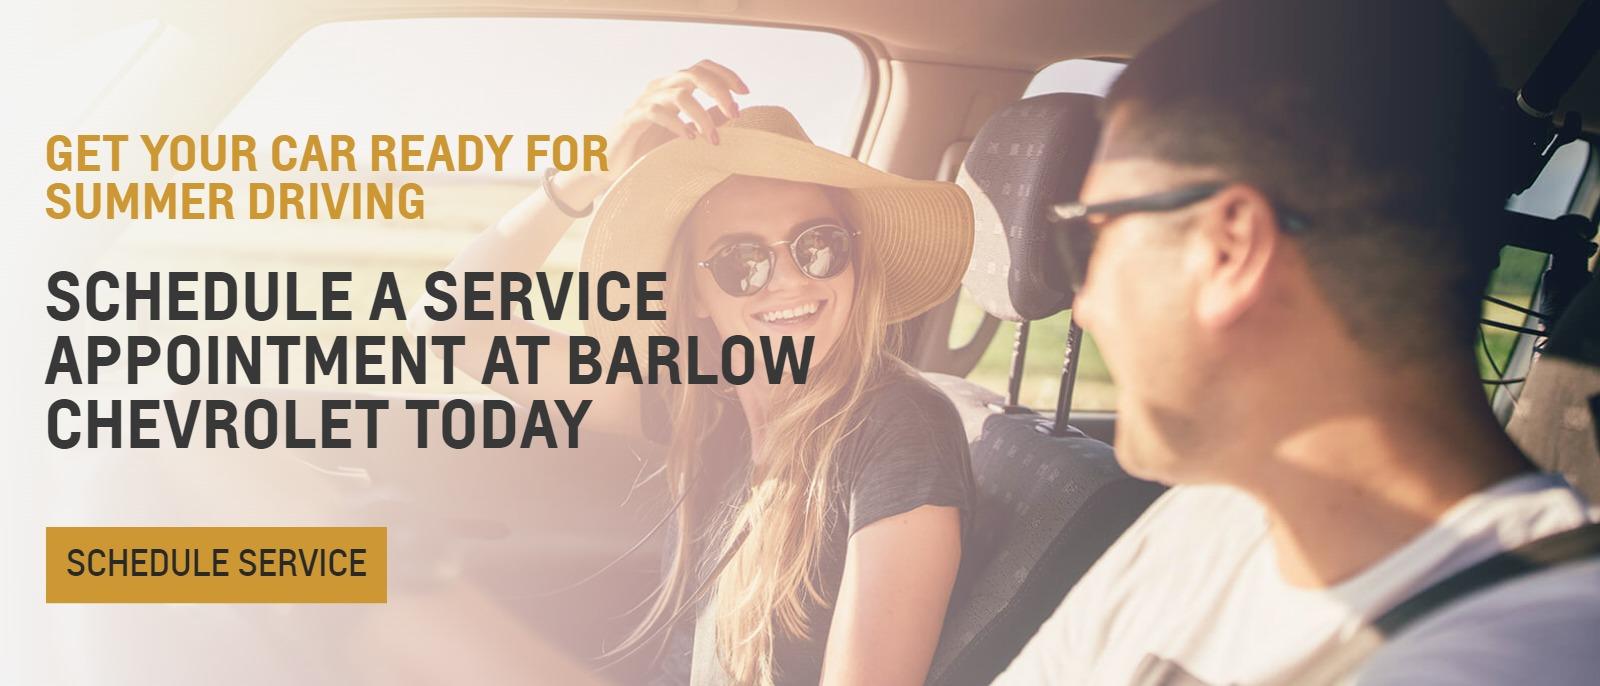 Get Your Car ready for summer driving – schedule a service appointment at Barlow Chevrolet today